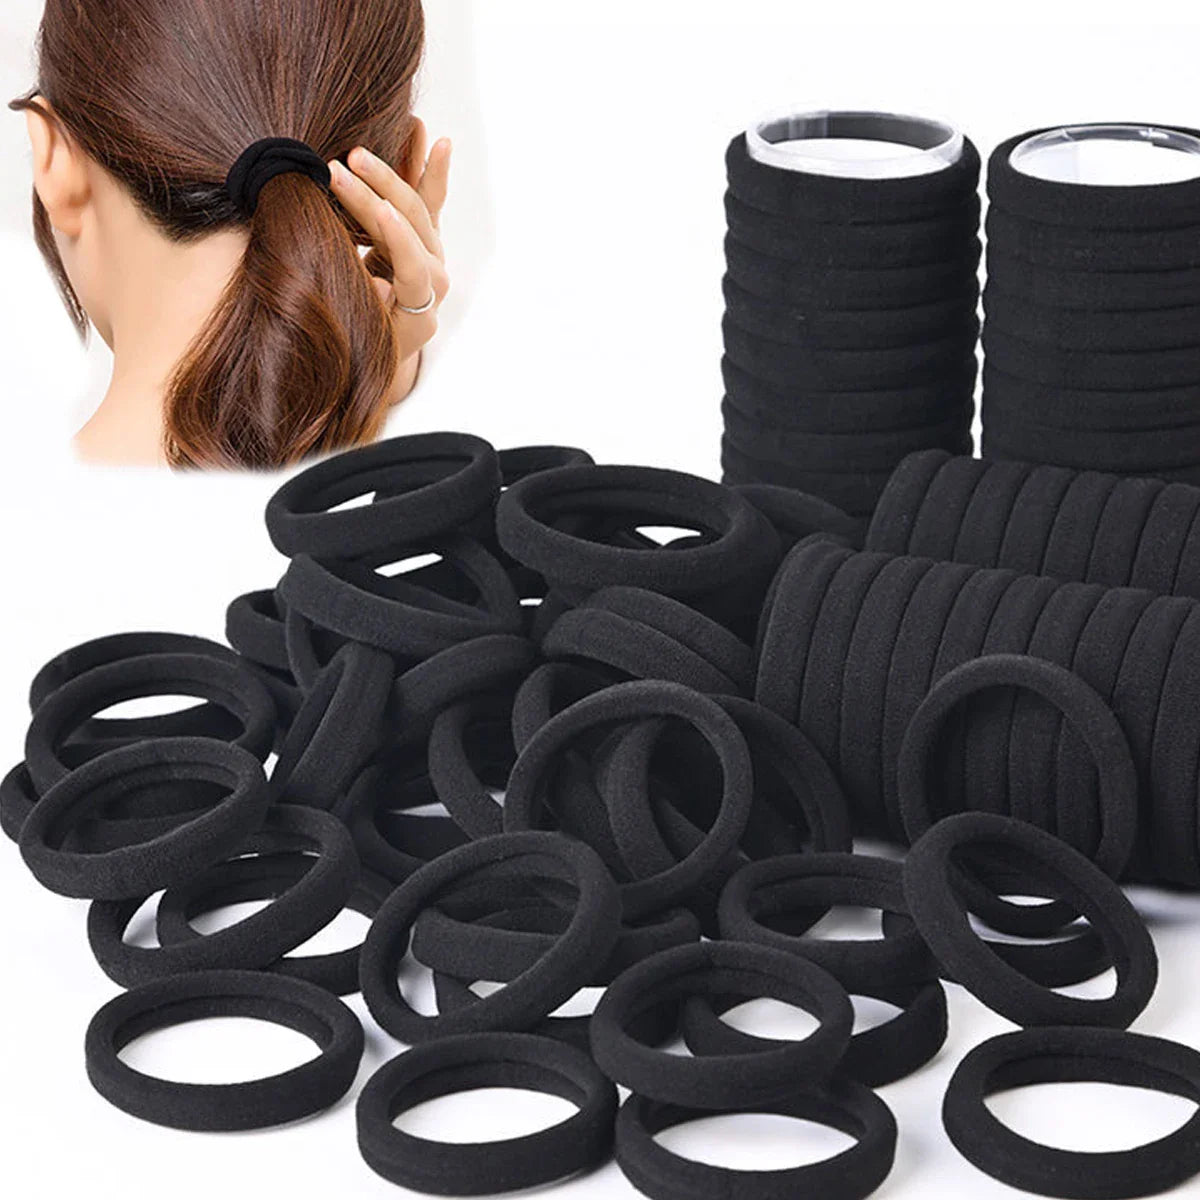 High Elastic Cotton Hair Bands with Durable Stretch